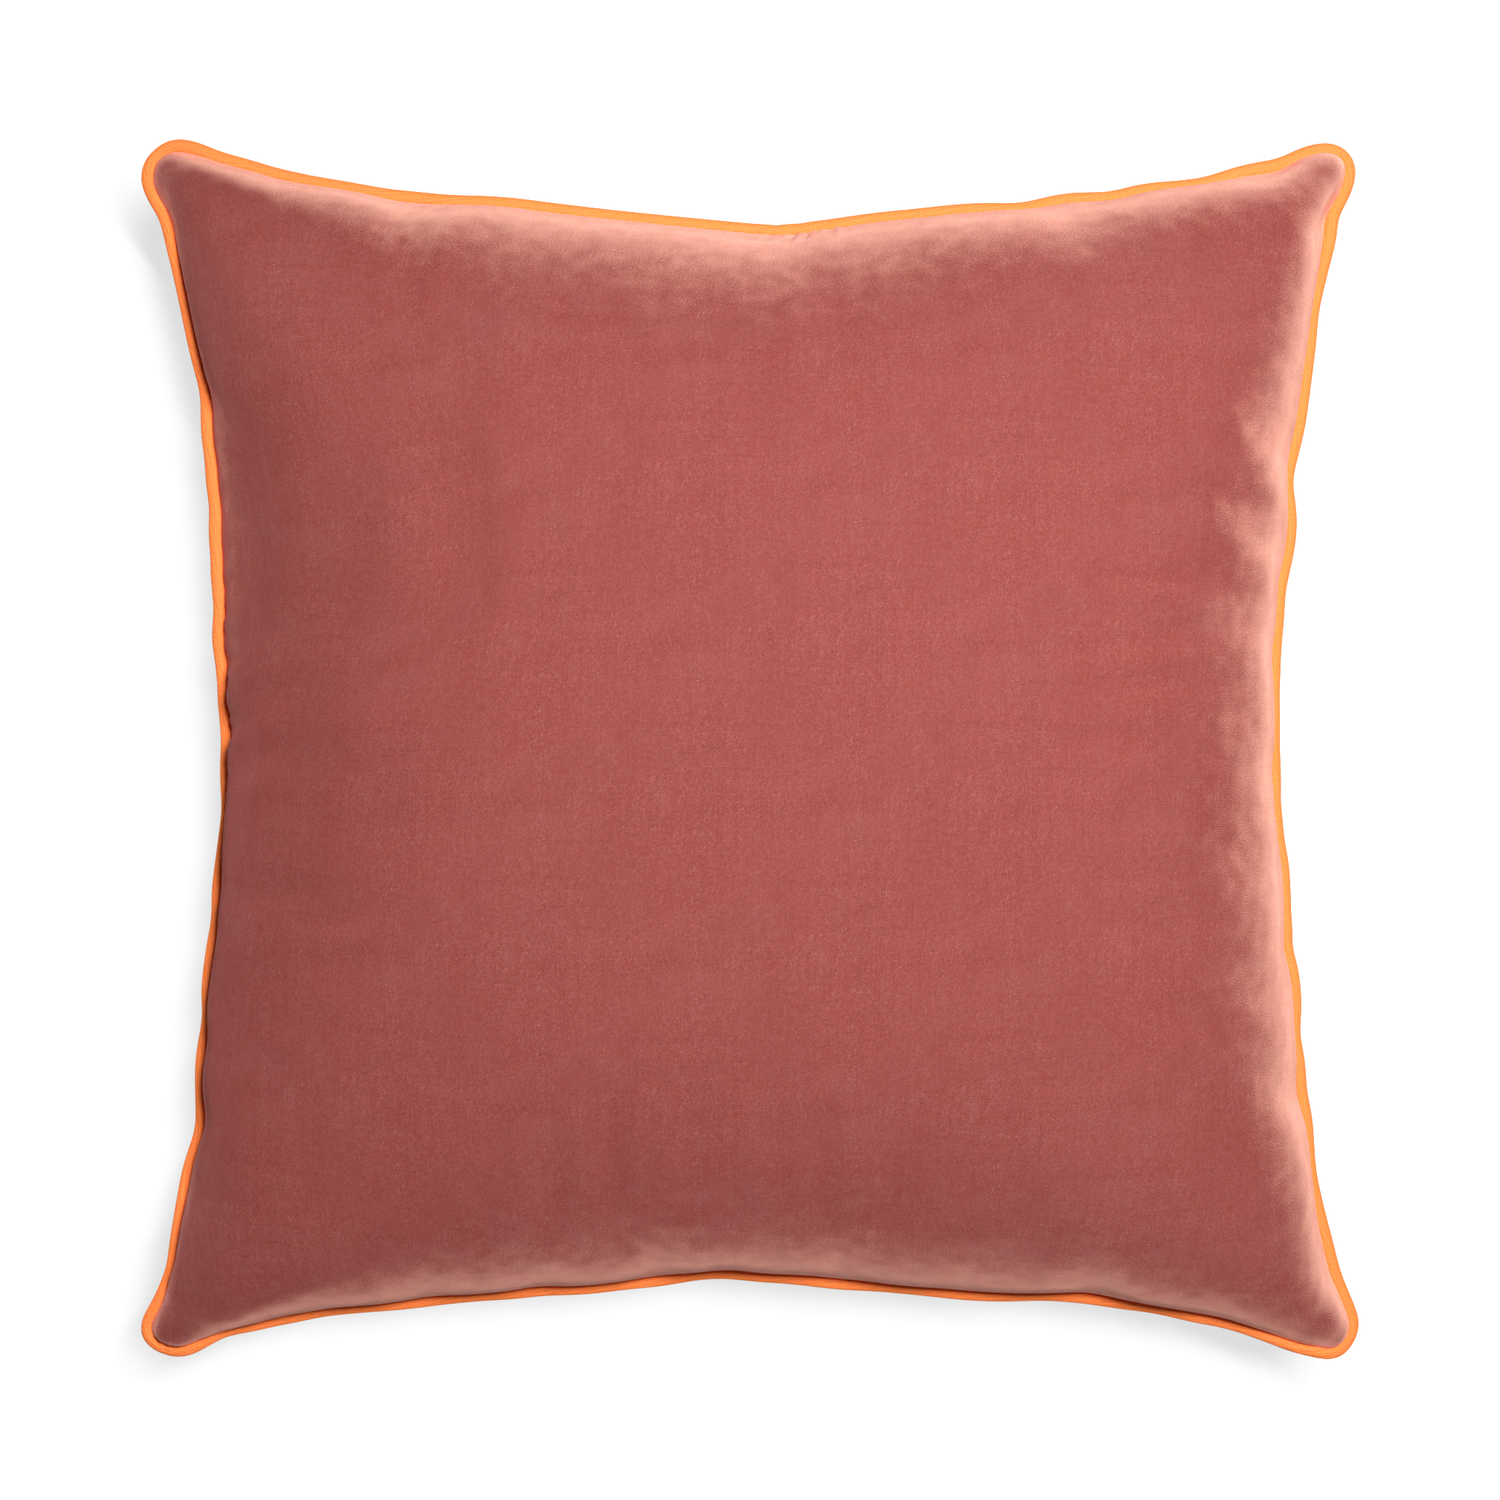 Euro-sham cosmo velvet custom coralpillow with clementine piping on white background